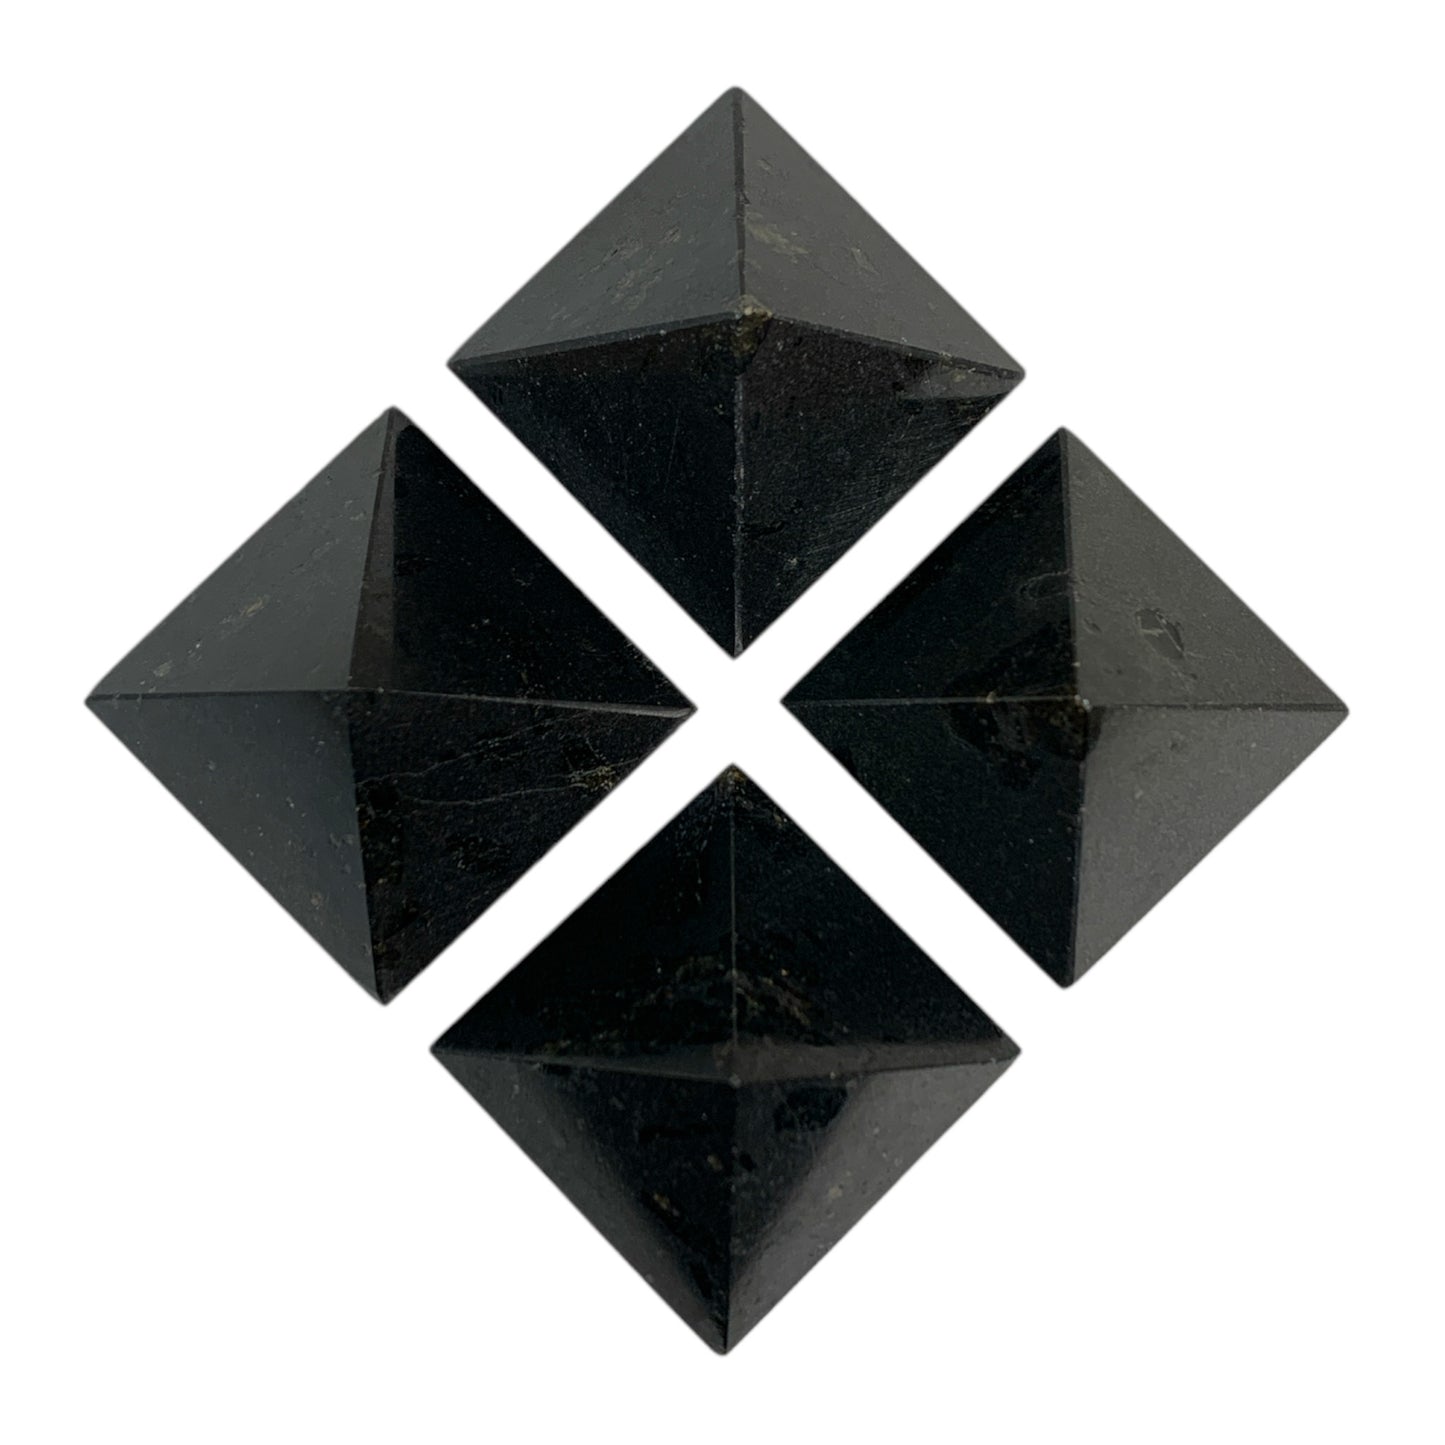 Black Tourmaline - Small Pyramids - 23 to 28mm - Price per piece 20g - Order in 5's - India - NEW121